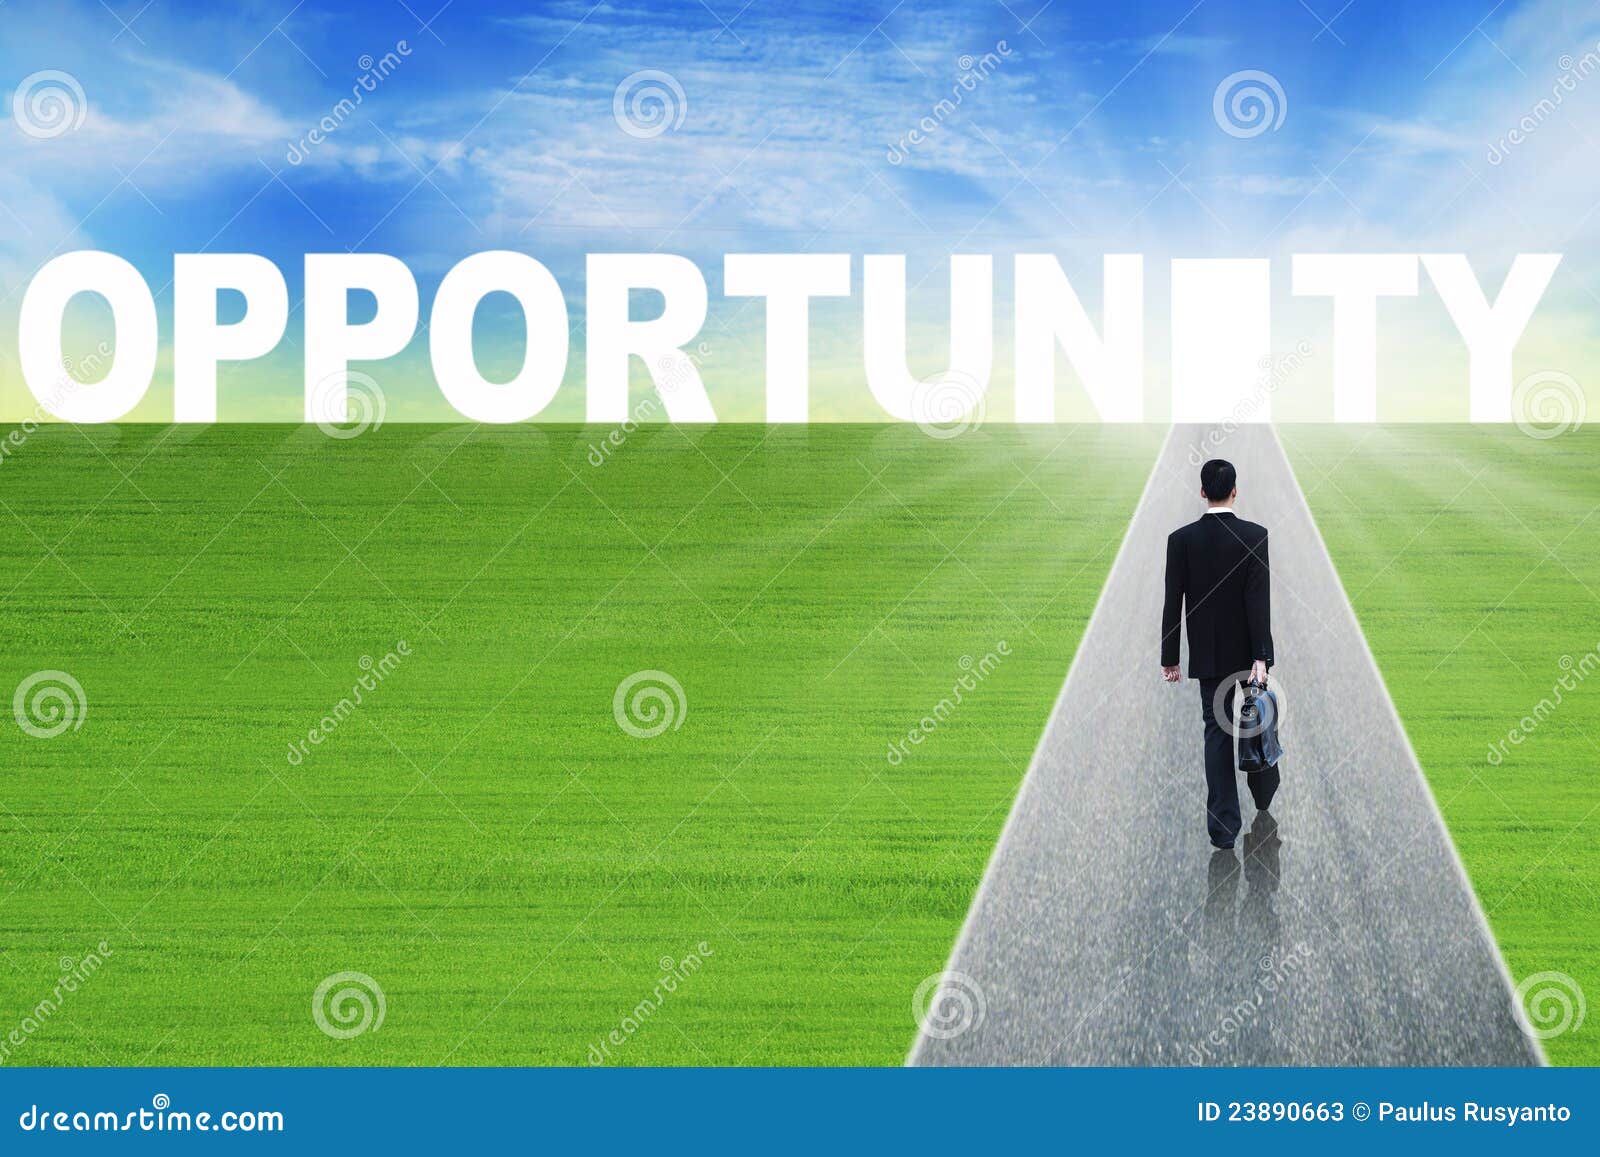 the path to opportunity